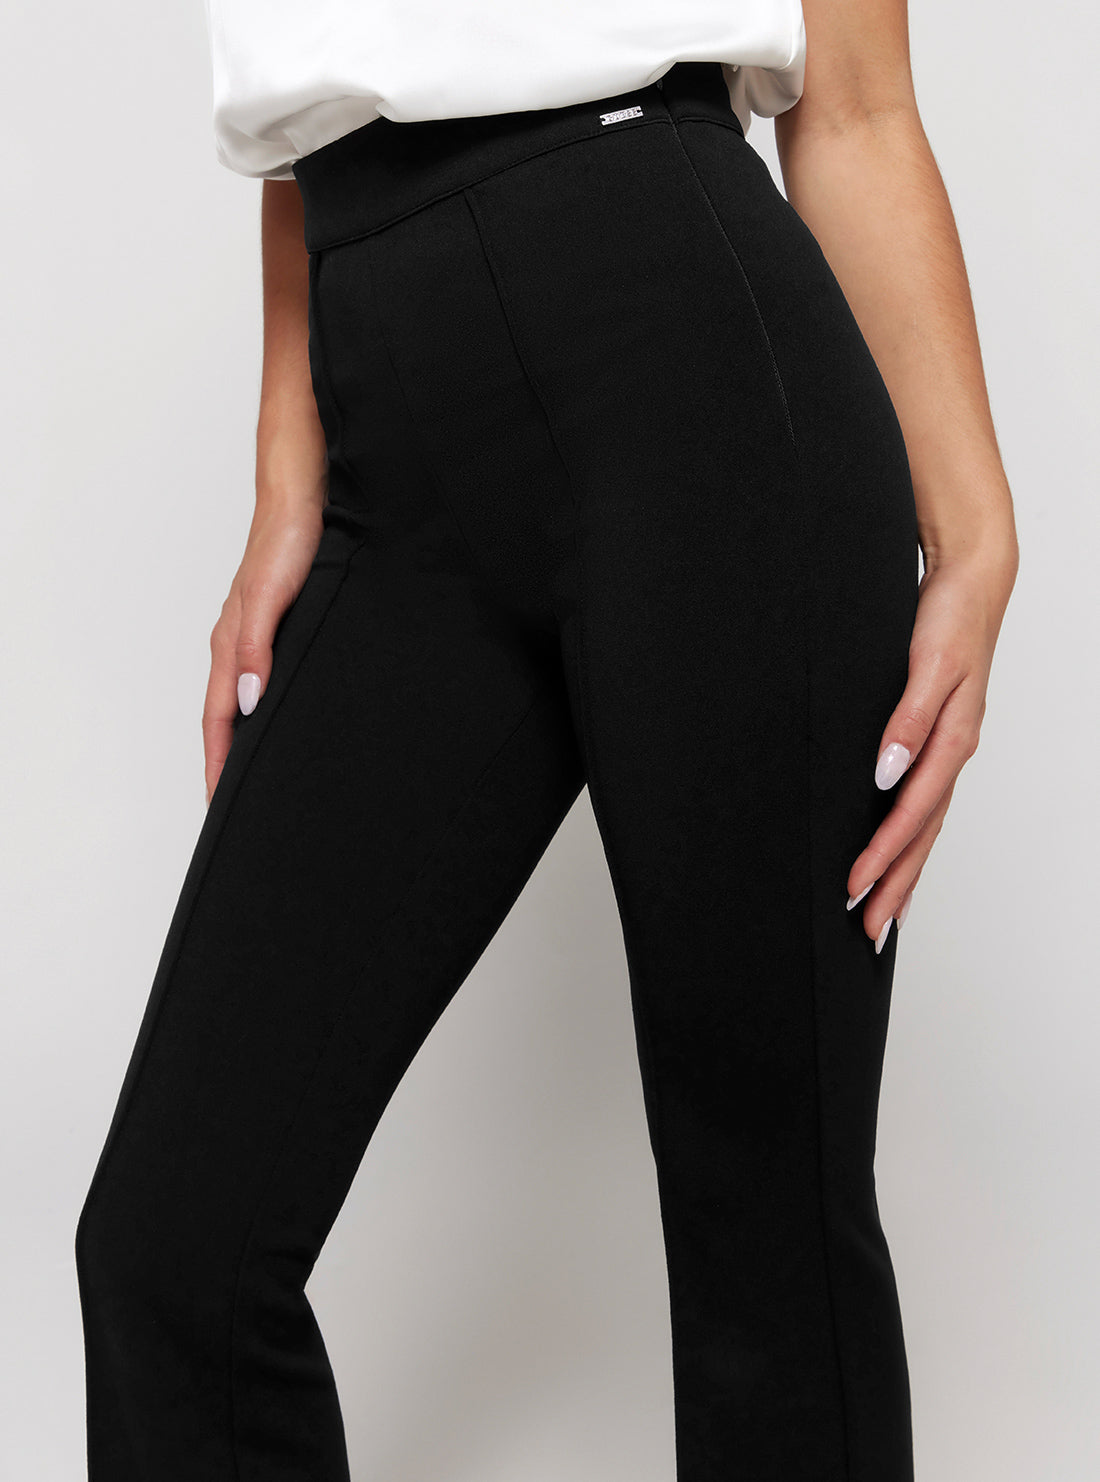 GUESS Black Flared Evelina Pants detail view